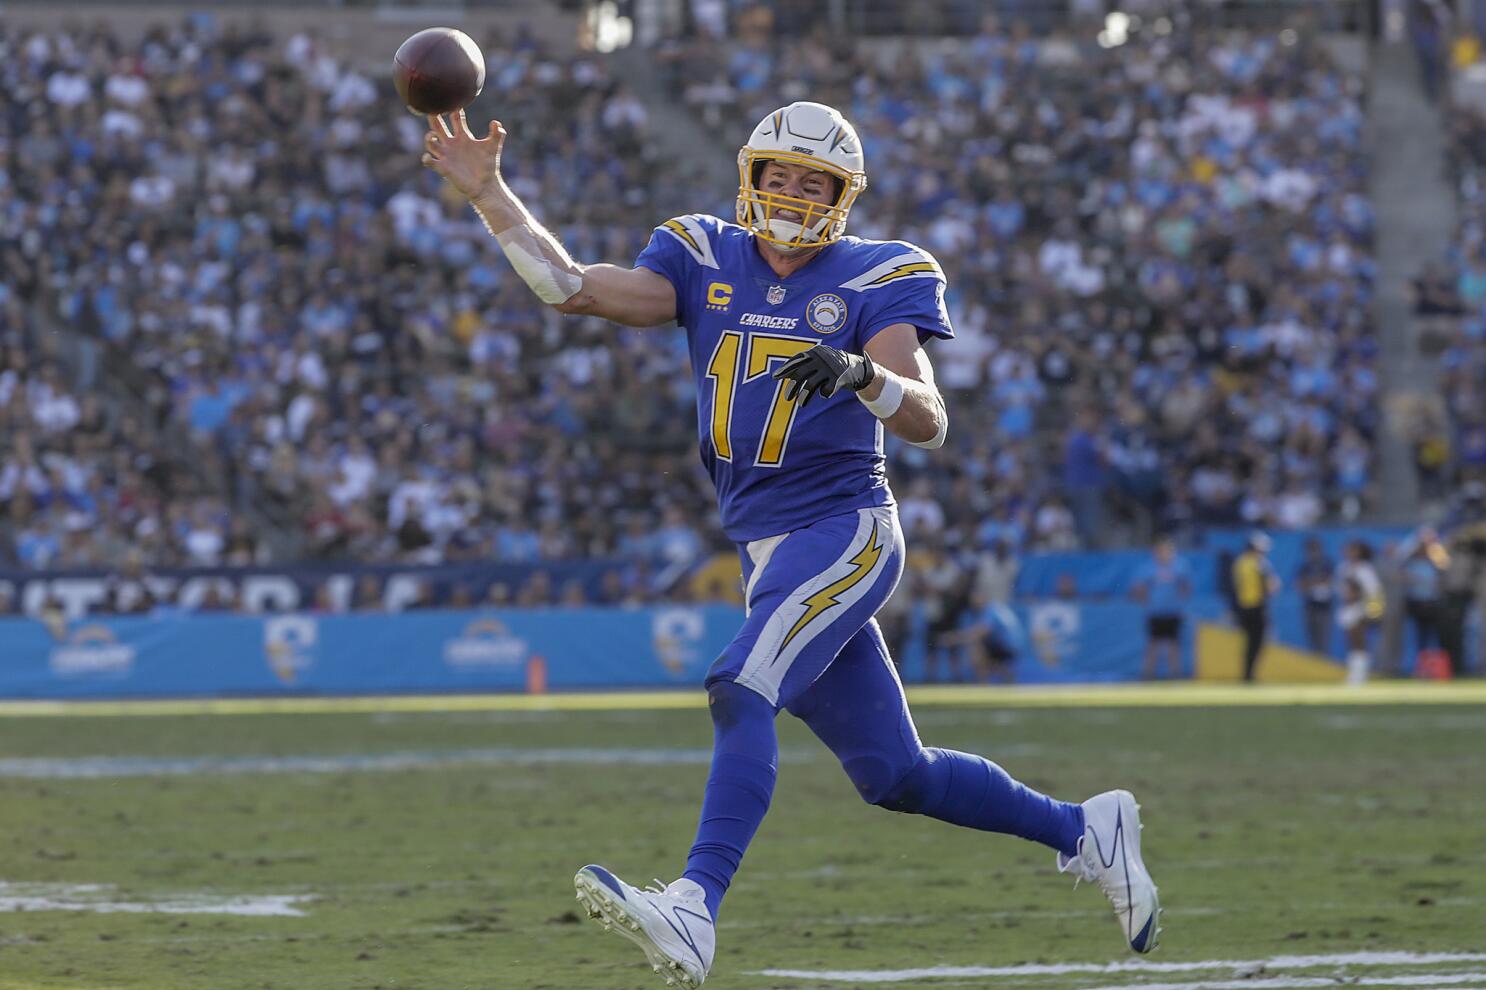 Chargers have some sweet new uniforms - The Washington Post